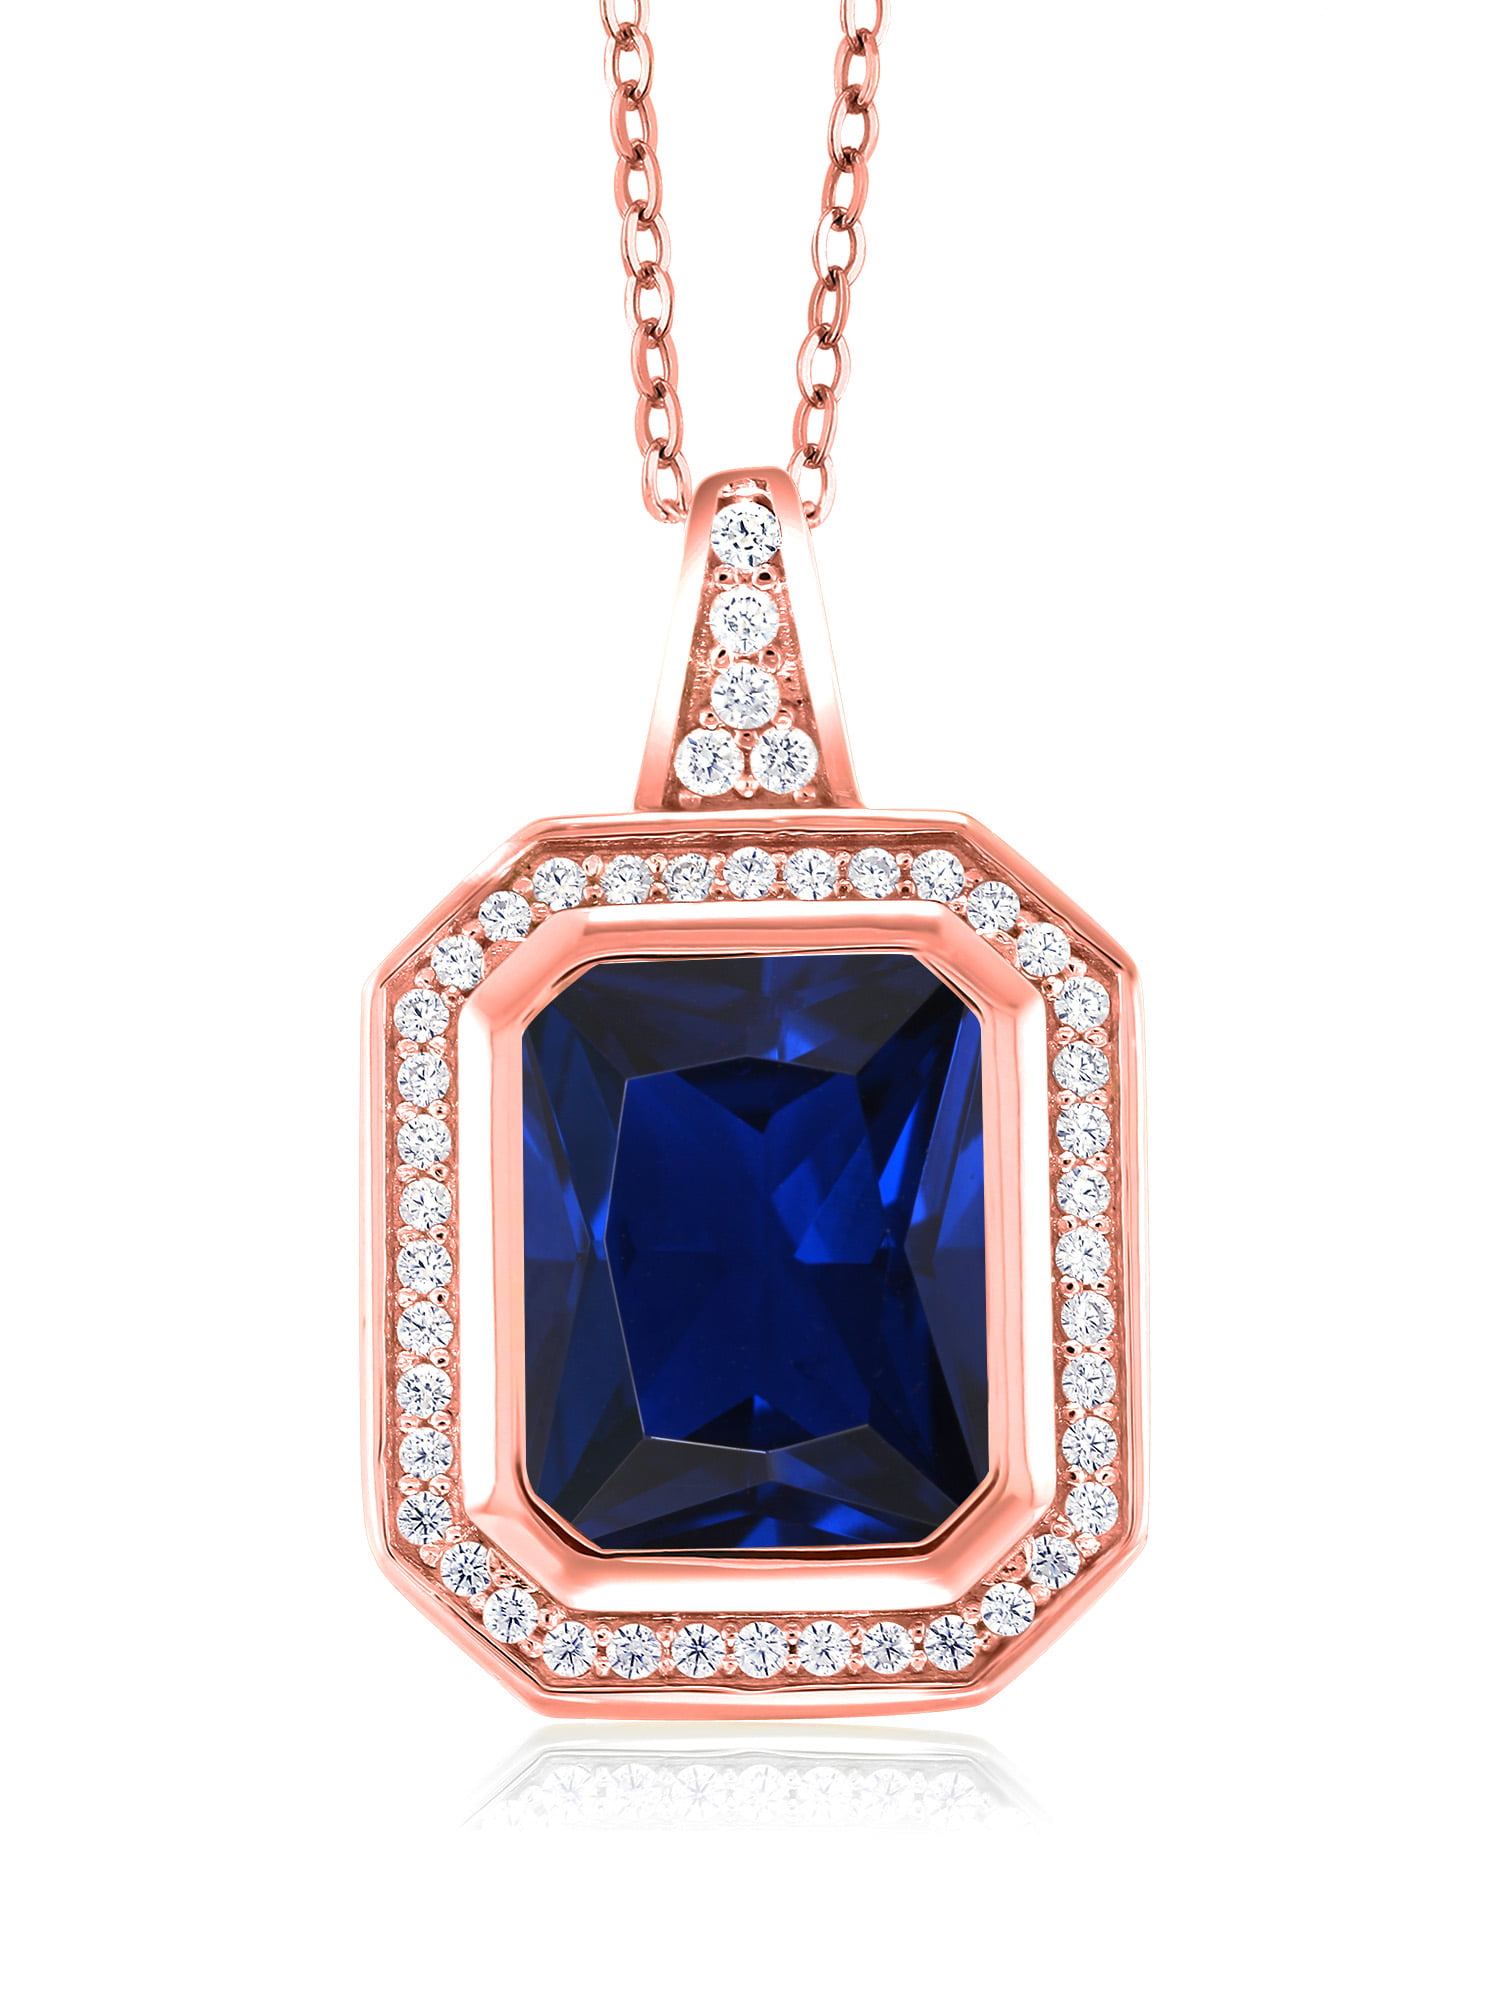 Gem Stone King 4.54 Ct Octagon Blue Simulated Sapphire 925 Sterling Silver Pendant 